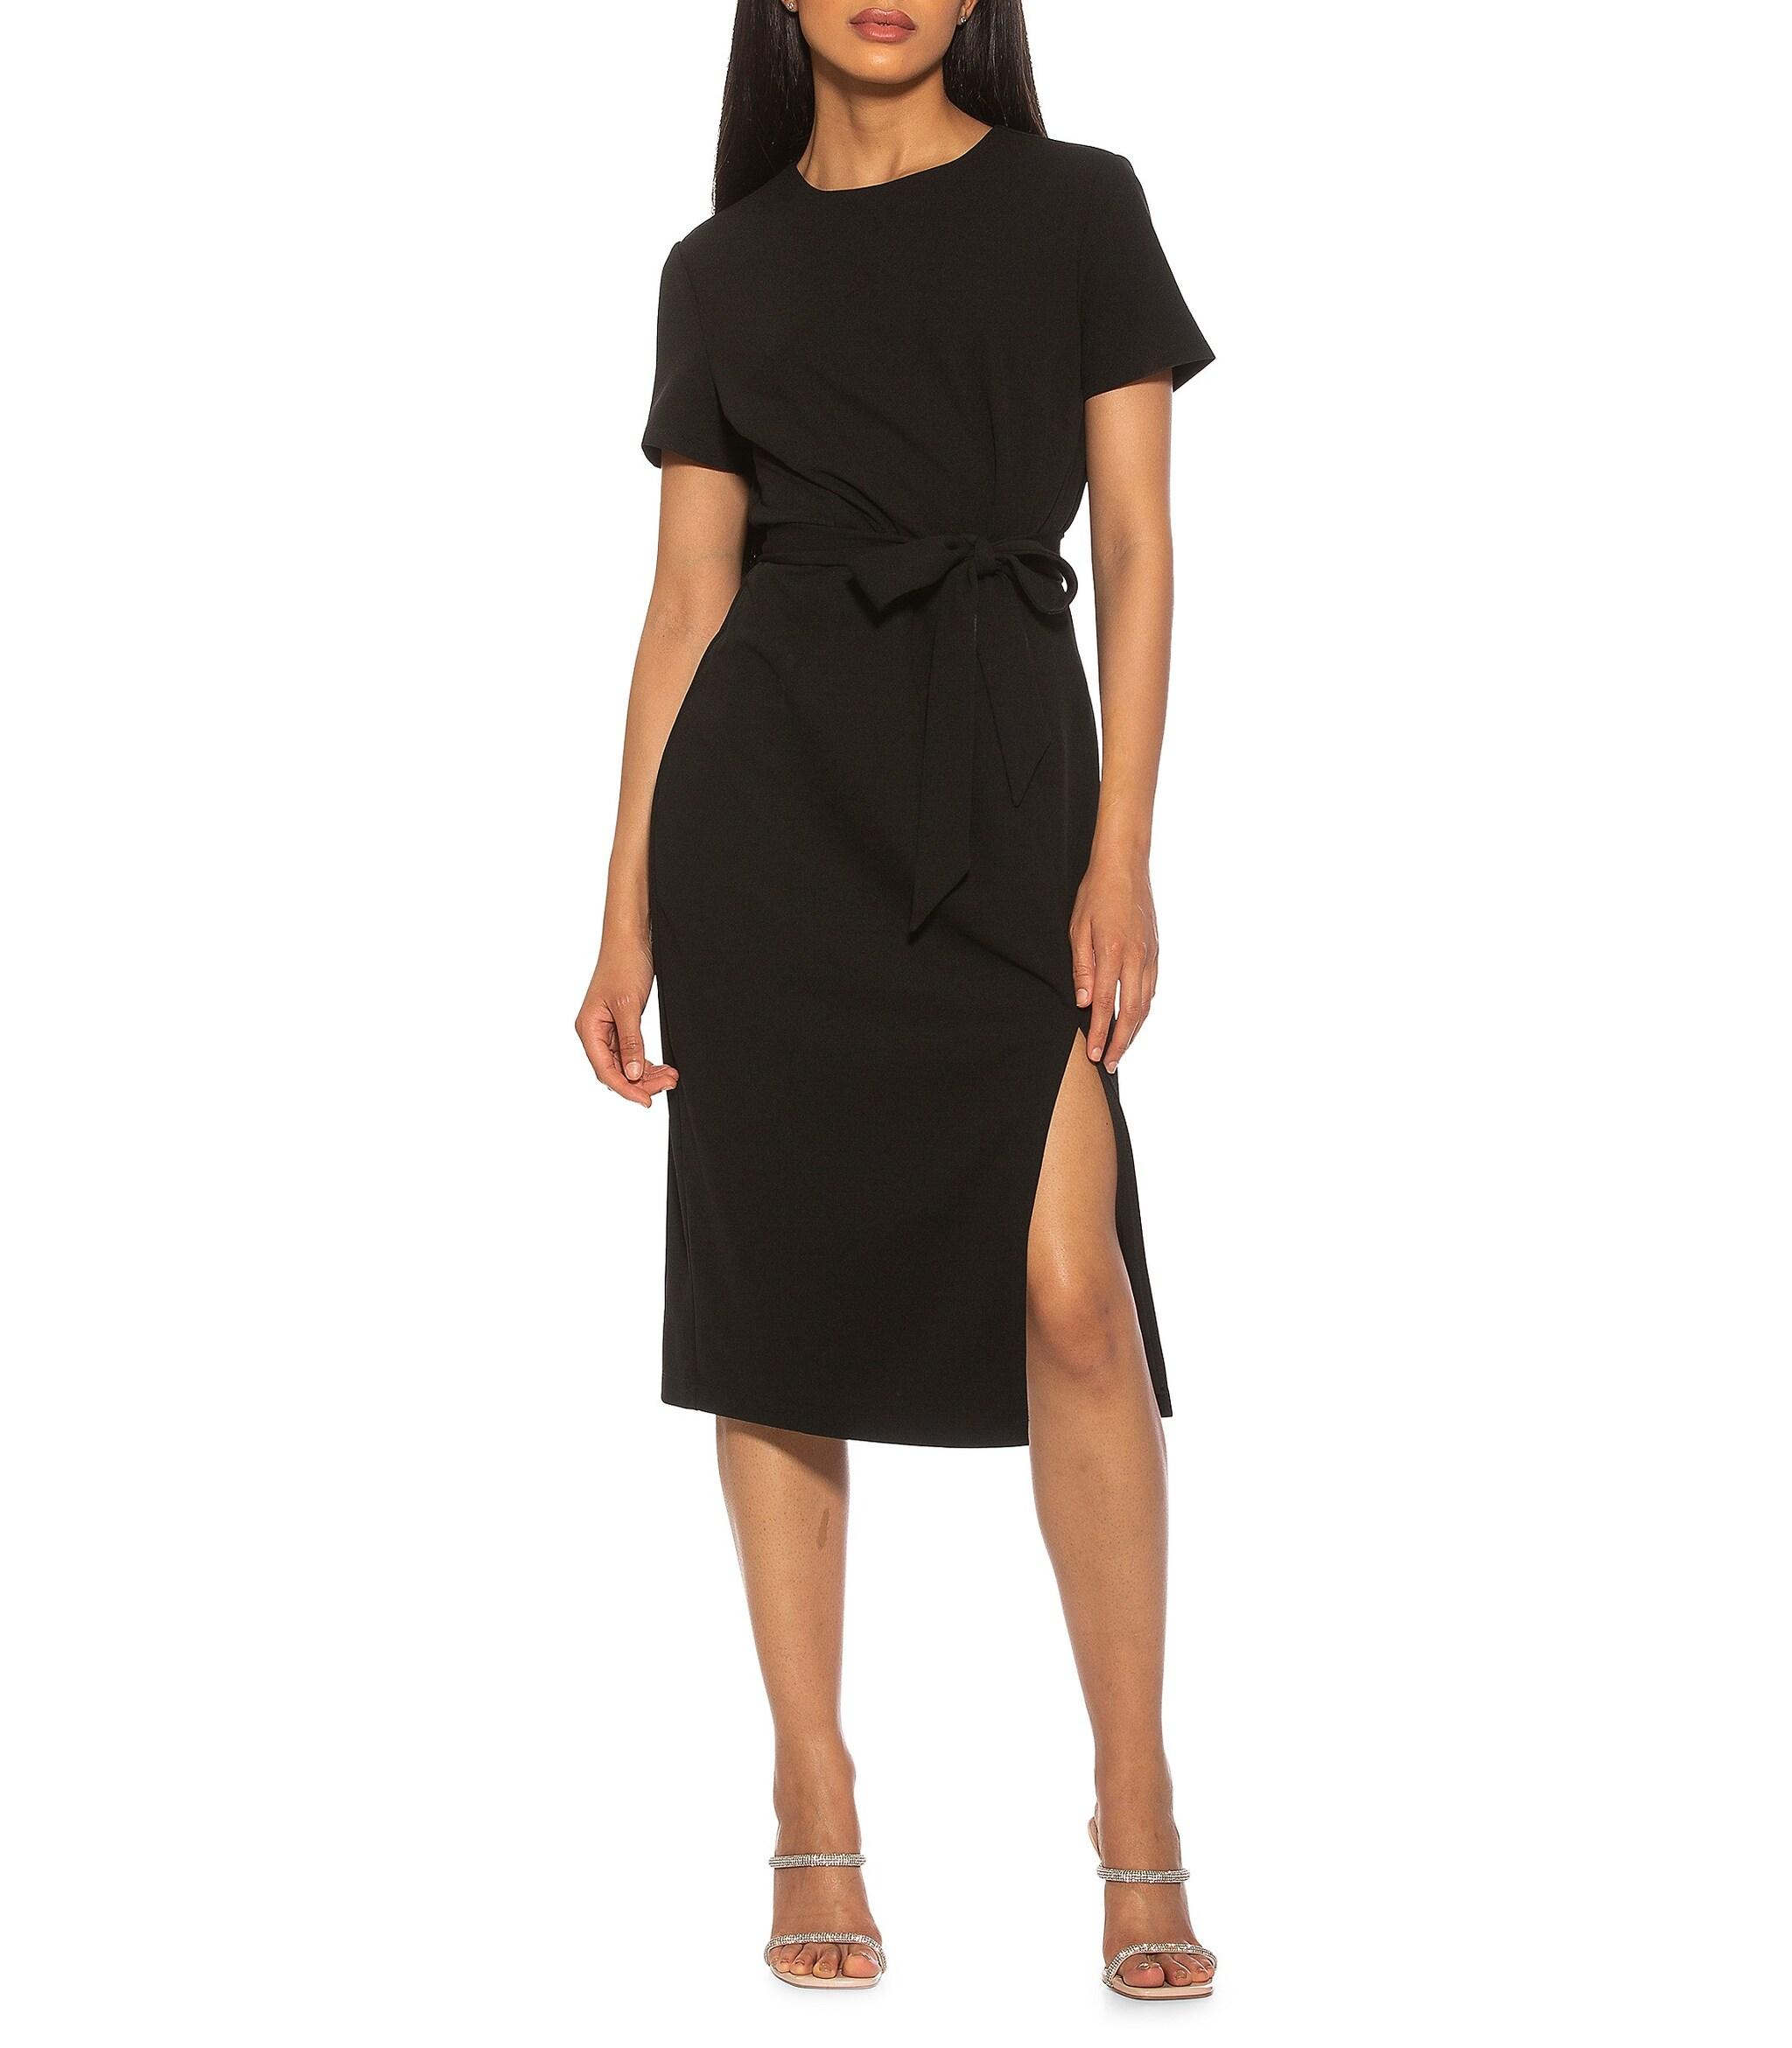 Alexia Admor Synthetic Dominique Tie Waist Dress in Black | Lyst